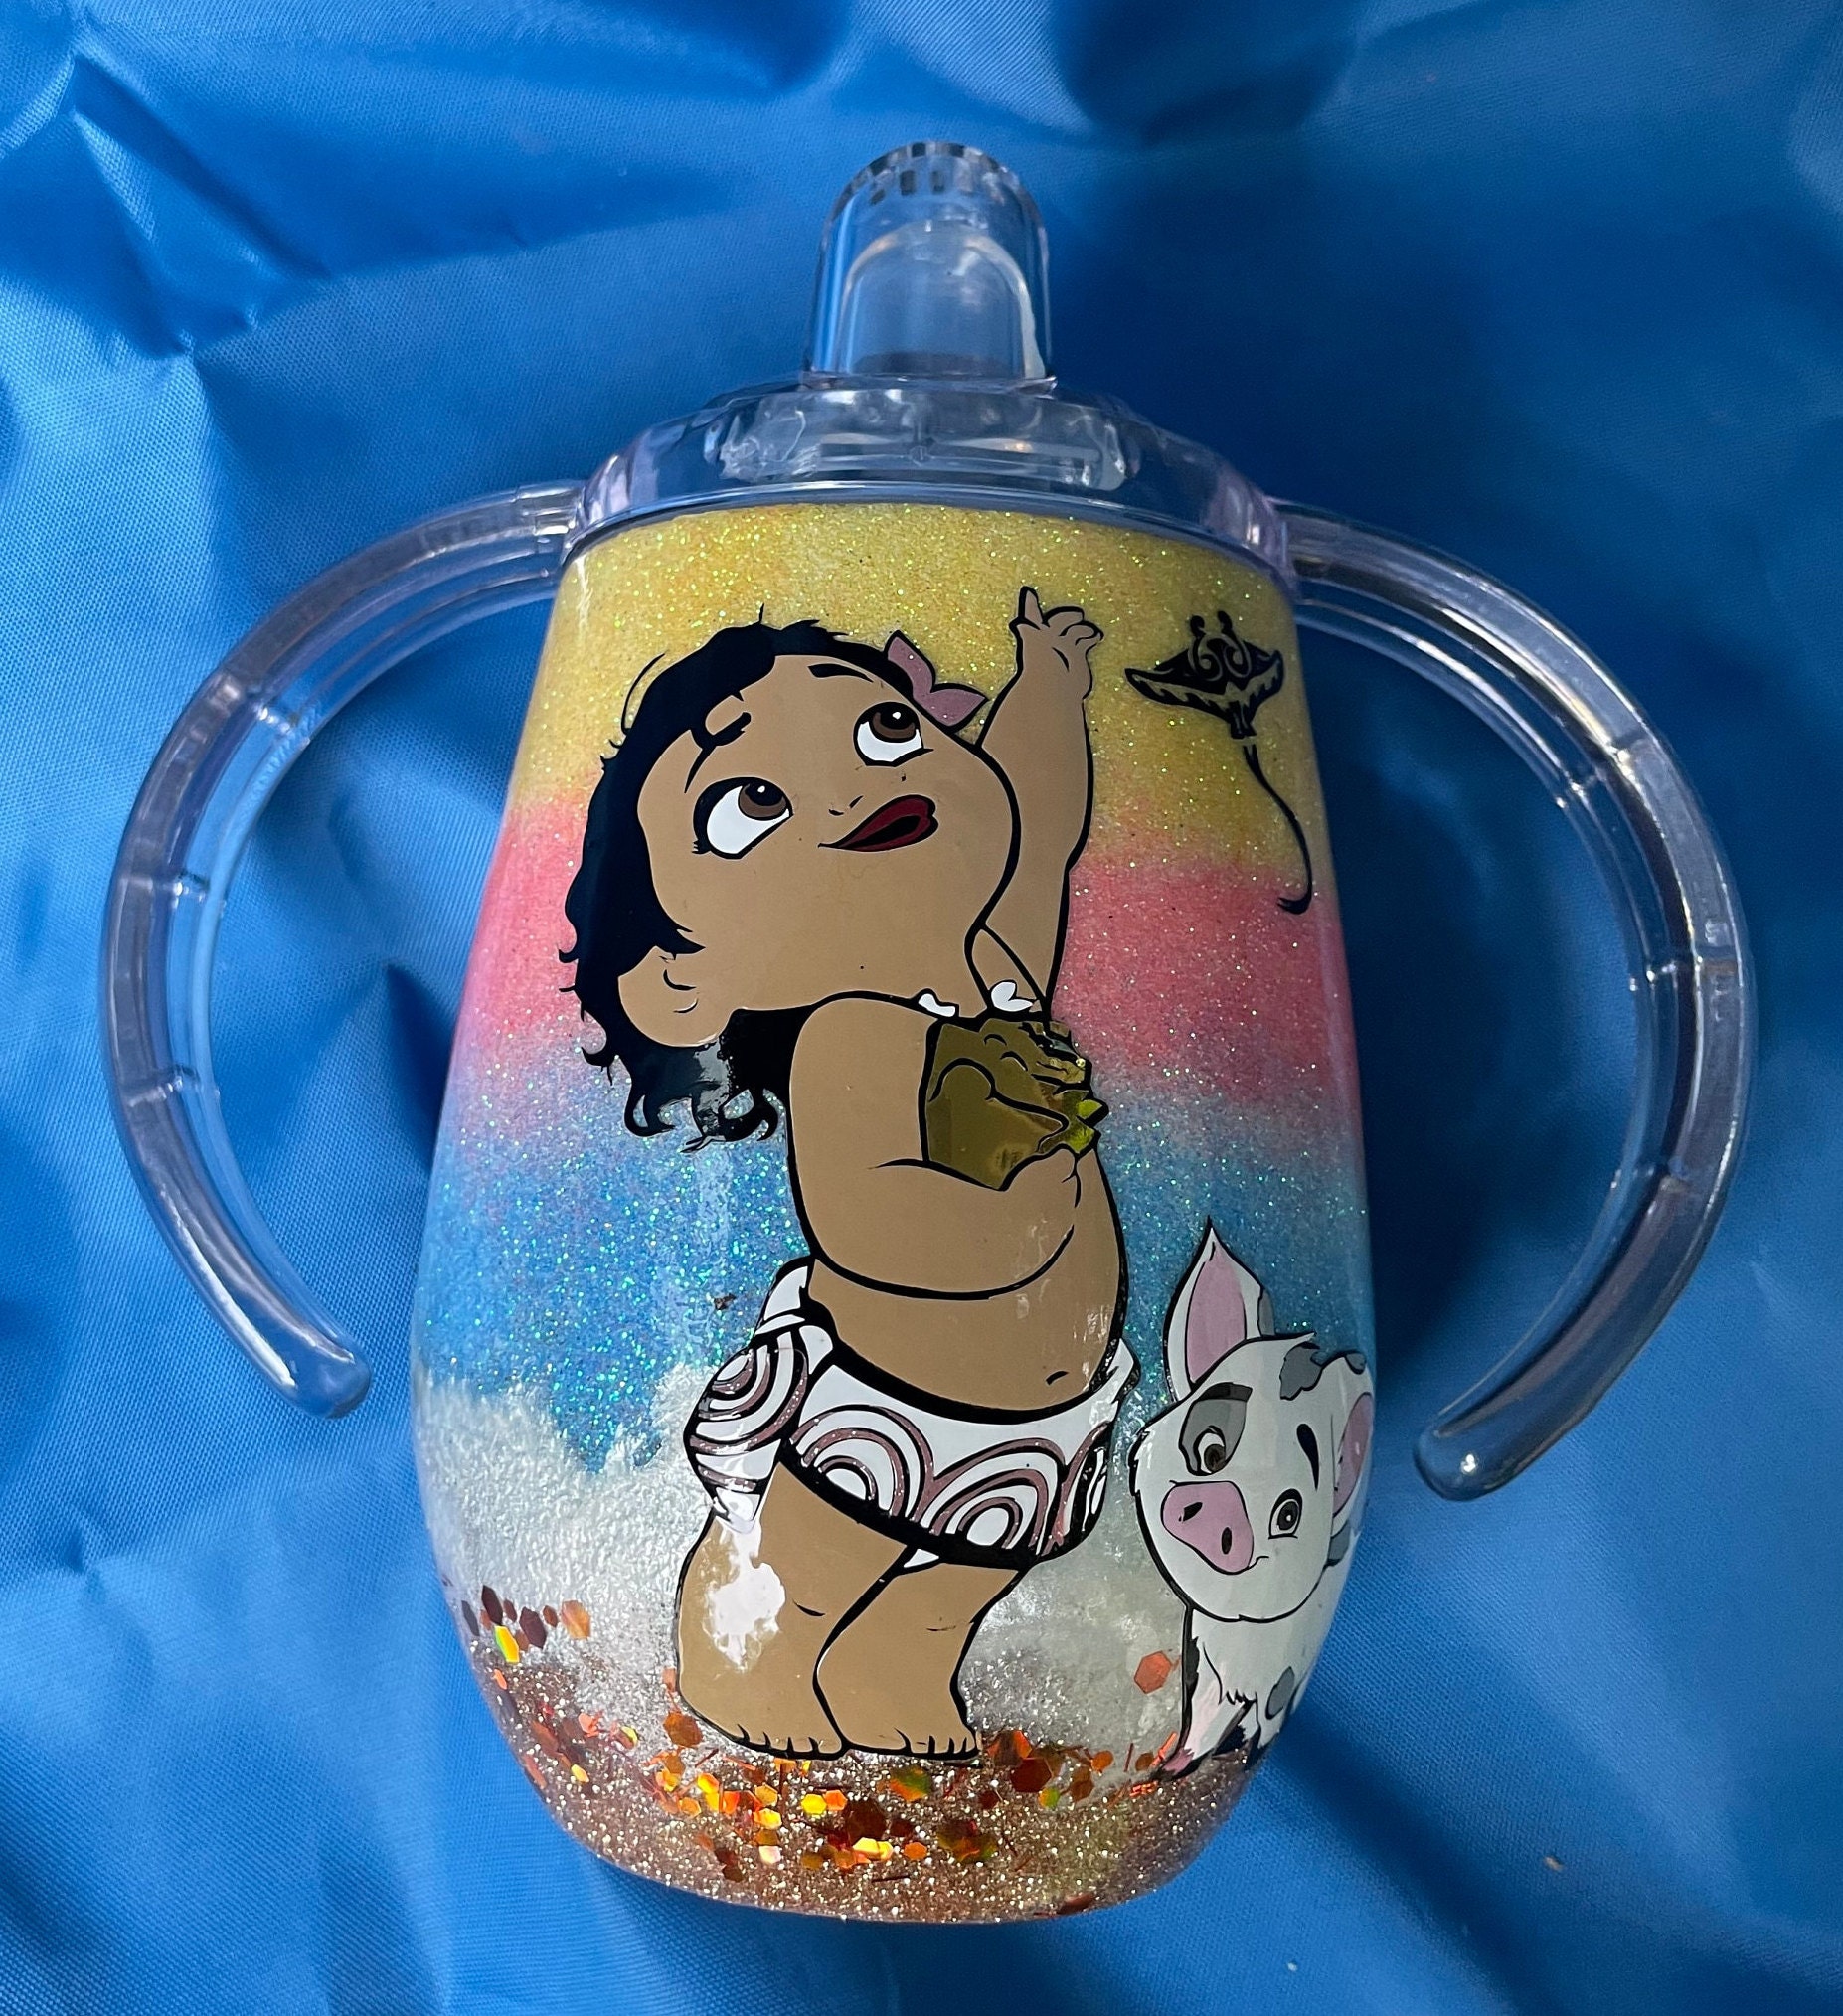 Moana - Baby Moana Grow with me Sippy Cup Tumbler